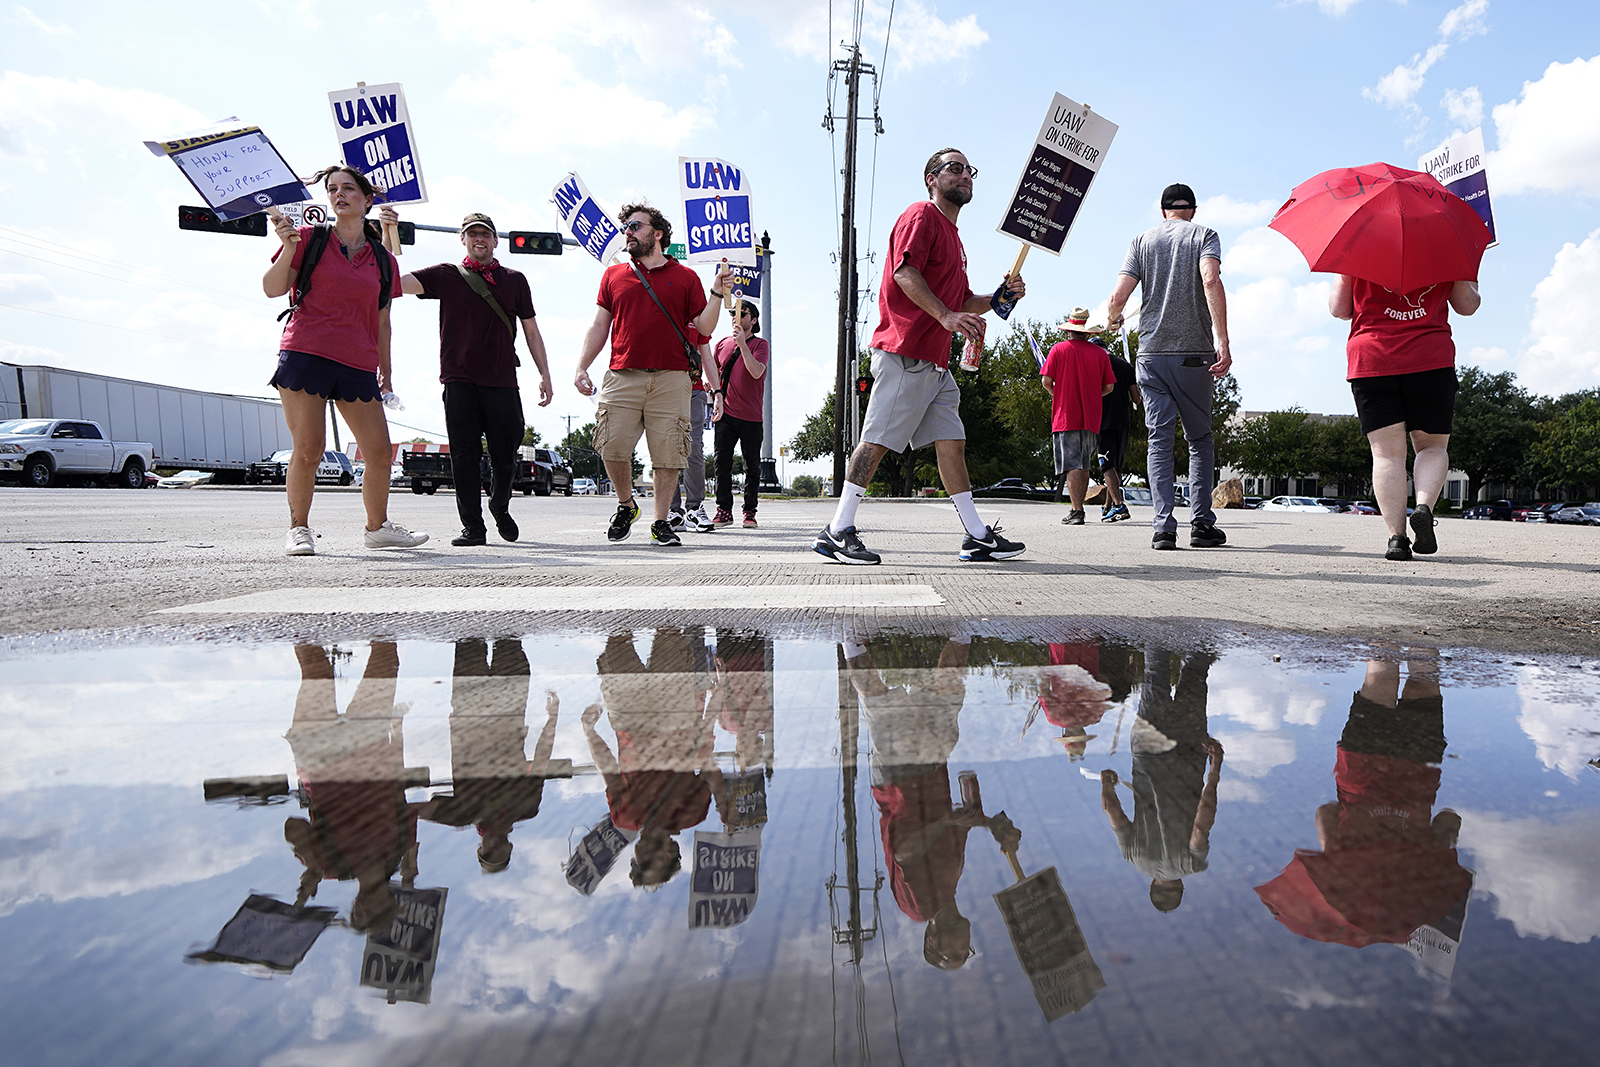 UAW union members picket on the street in front of a Stellantis distribution center, Monday, Sept. 25 in Carrollton, Texas.